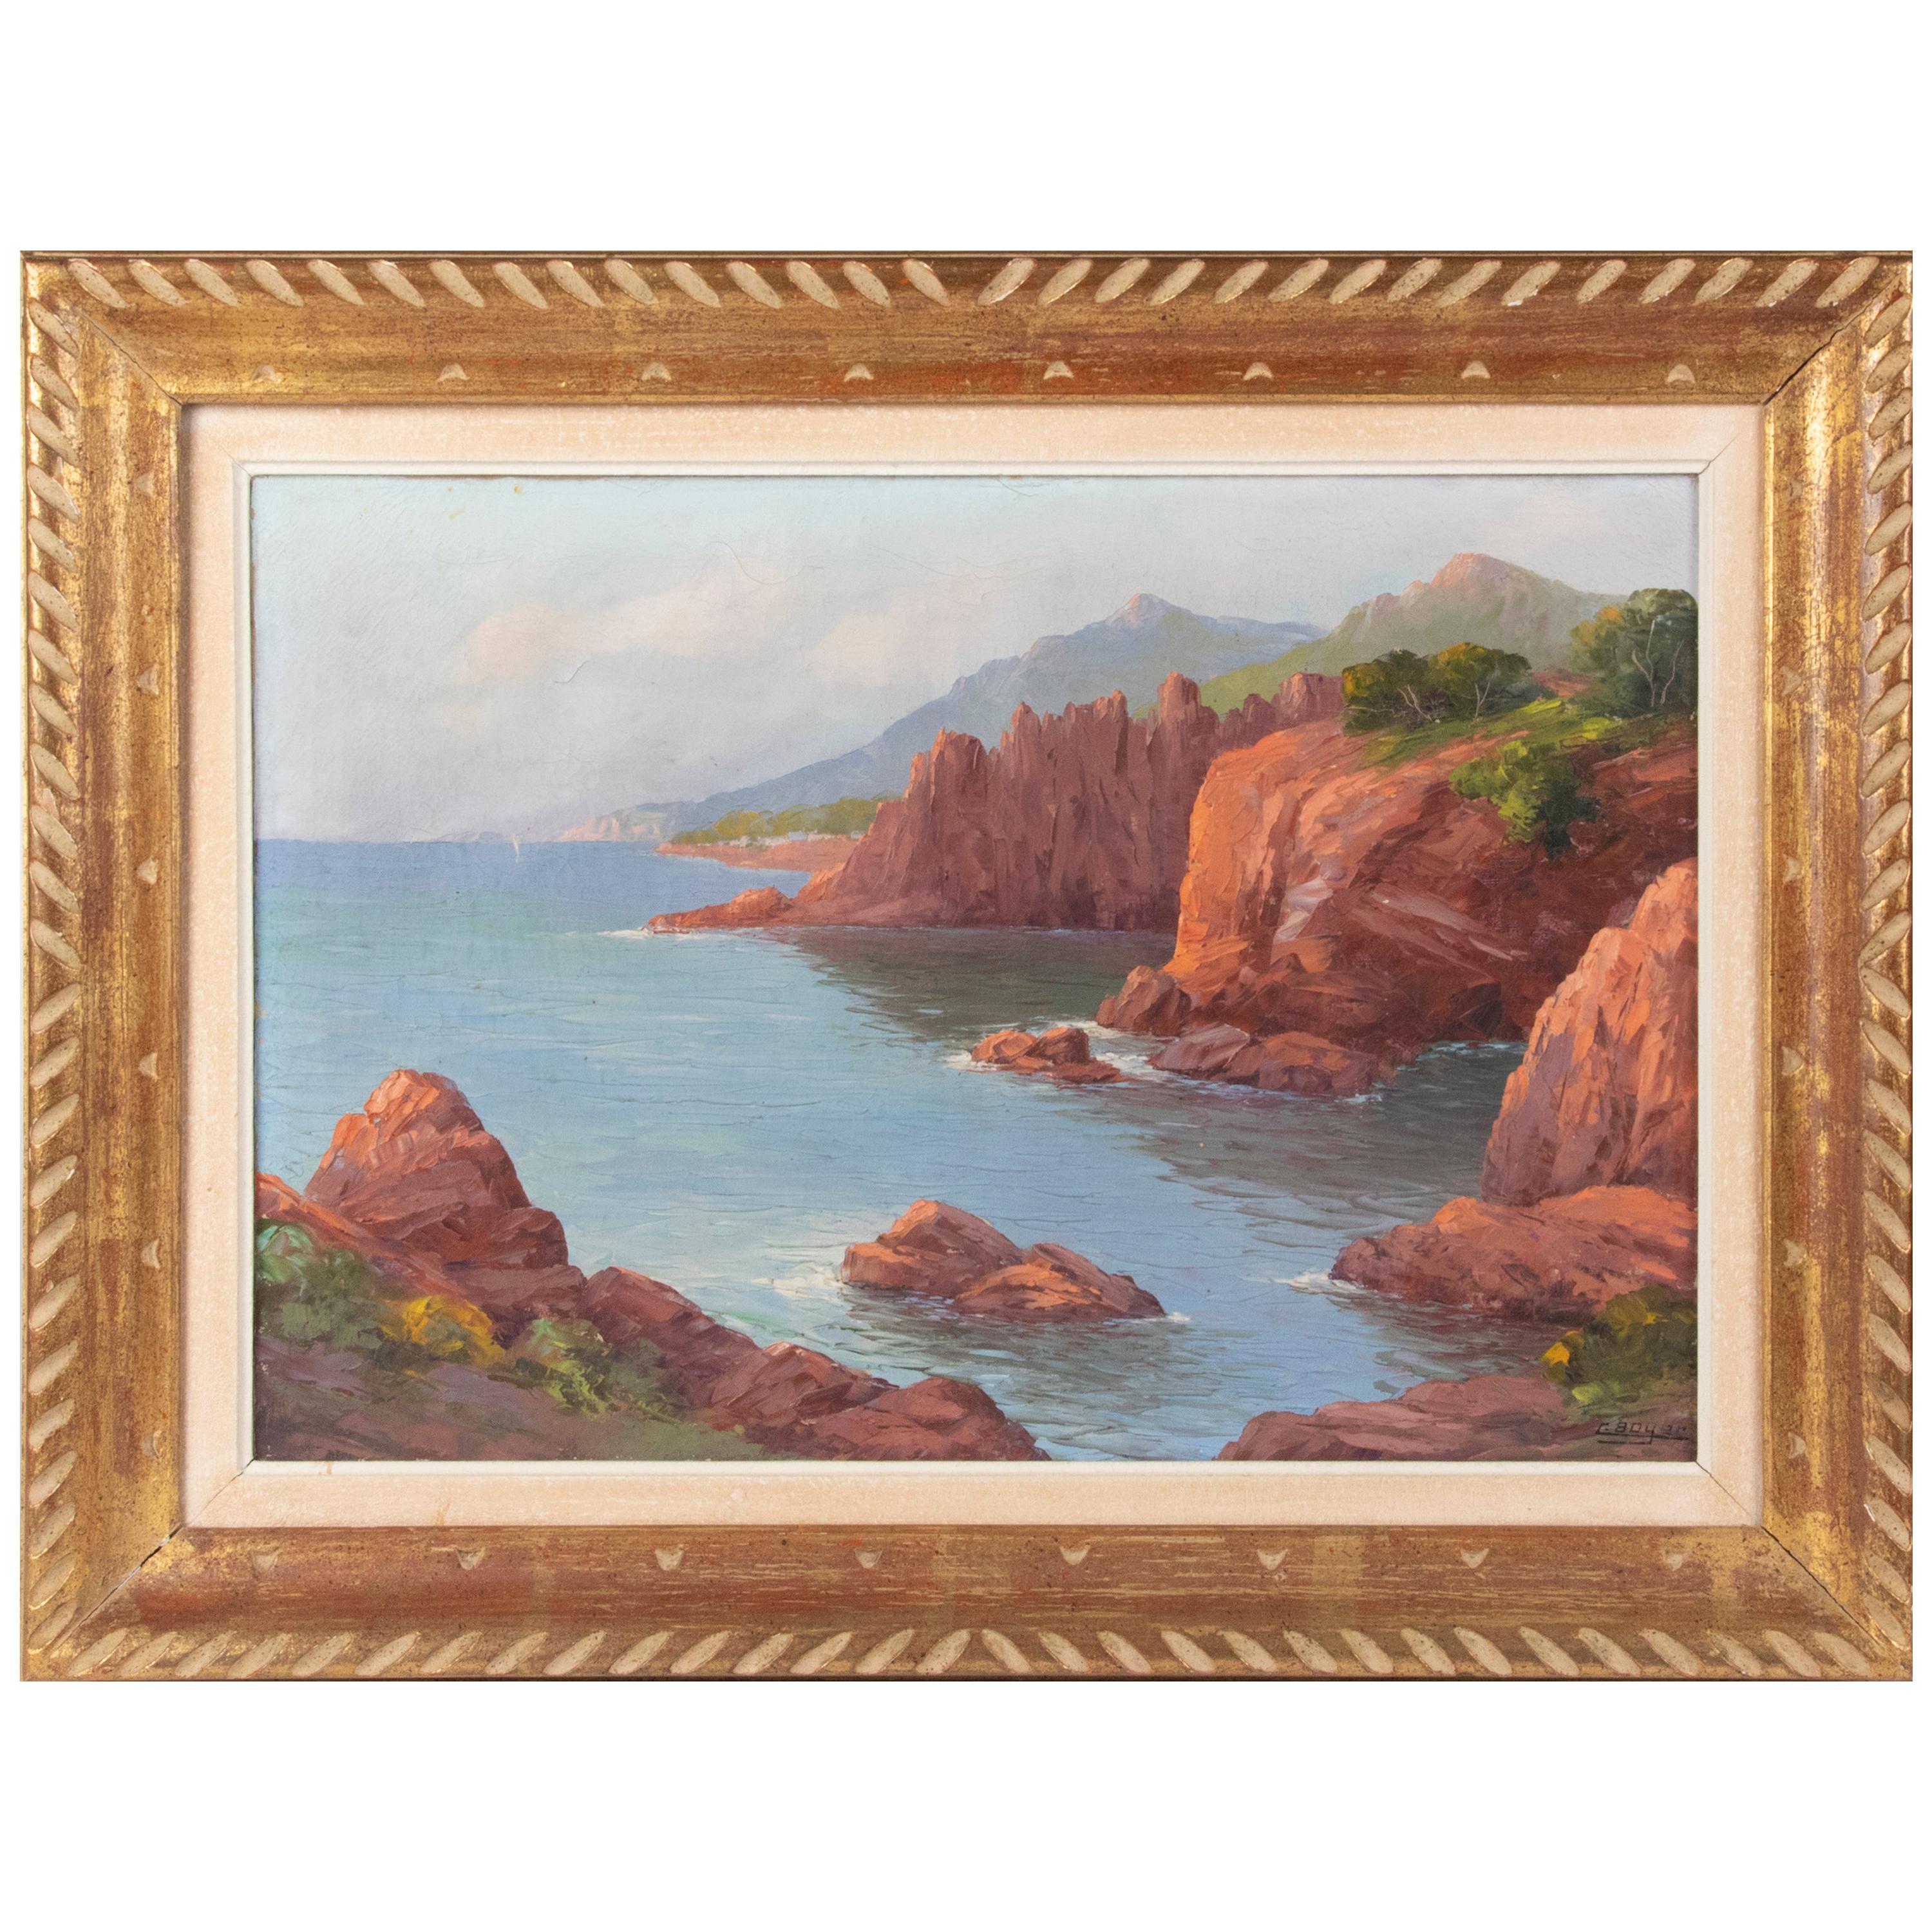 Early 20th Century Mediterranean Coastal Landscape Painting by Clément Boyer For Sale